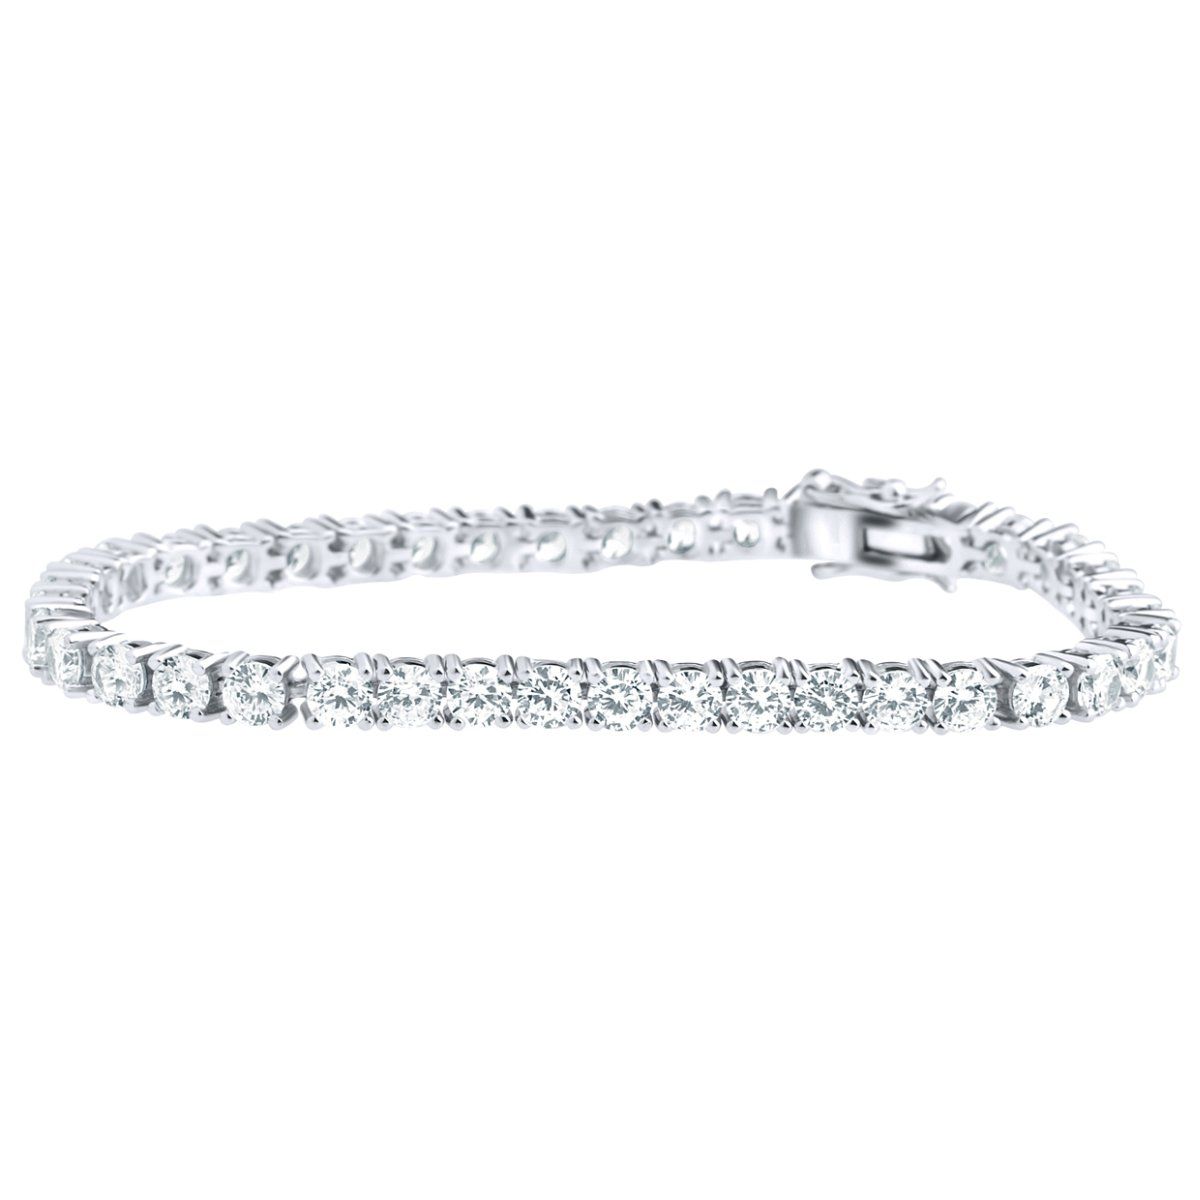 Iced Out 925 Sterling Silber Armband – TENNIS 4mm